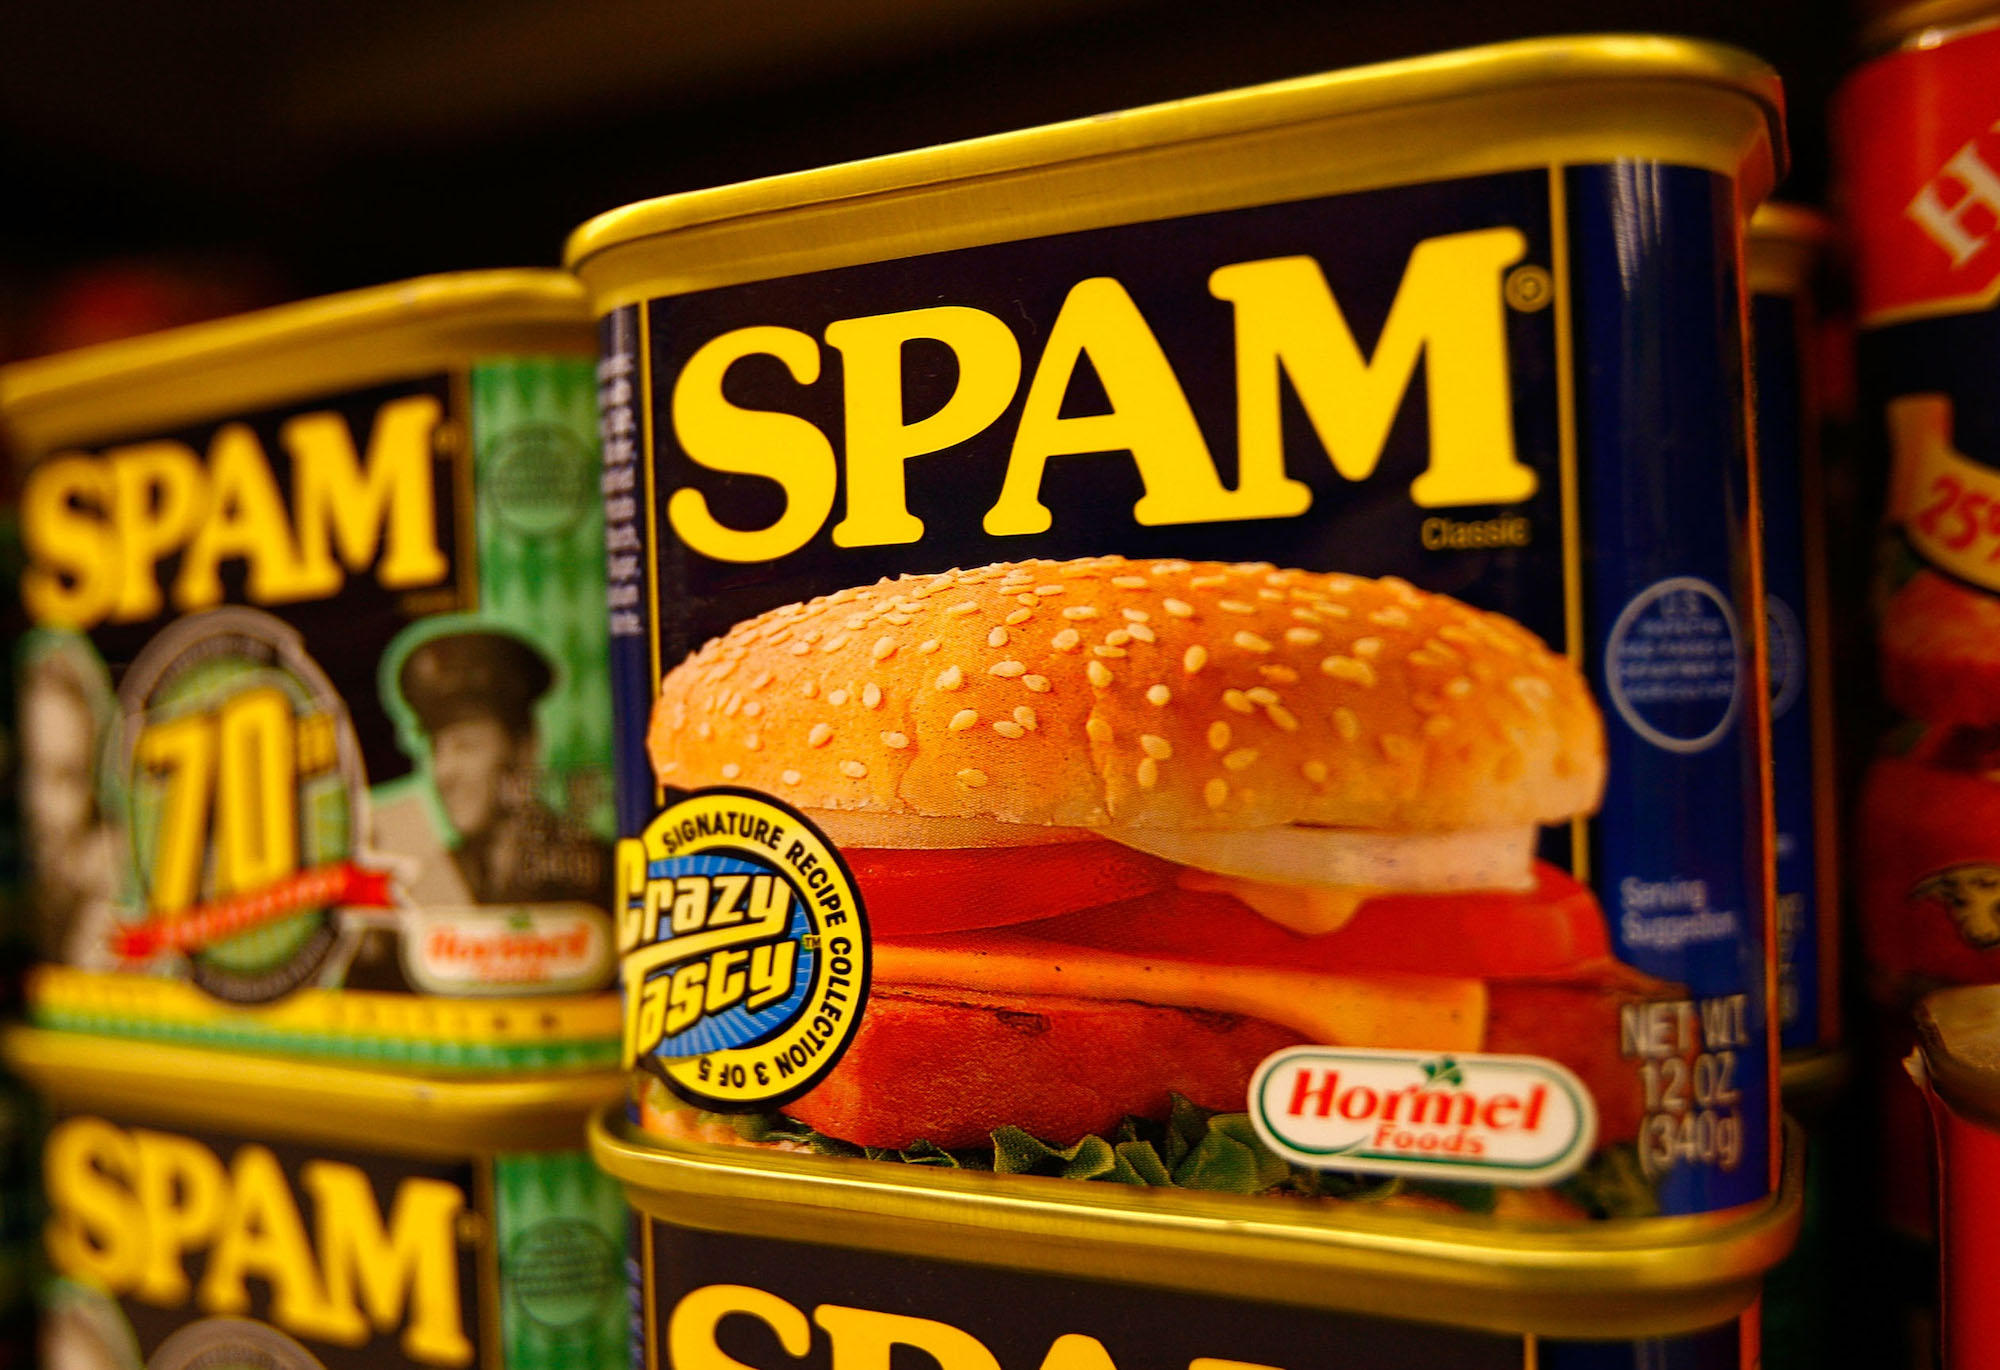 Spam recall Hormel recalls more than 220,000 pounds of Spam, canned